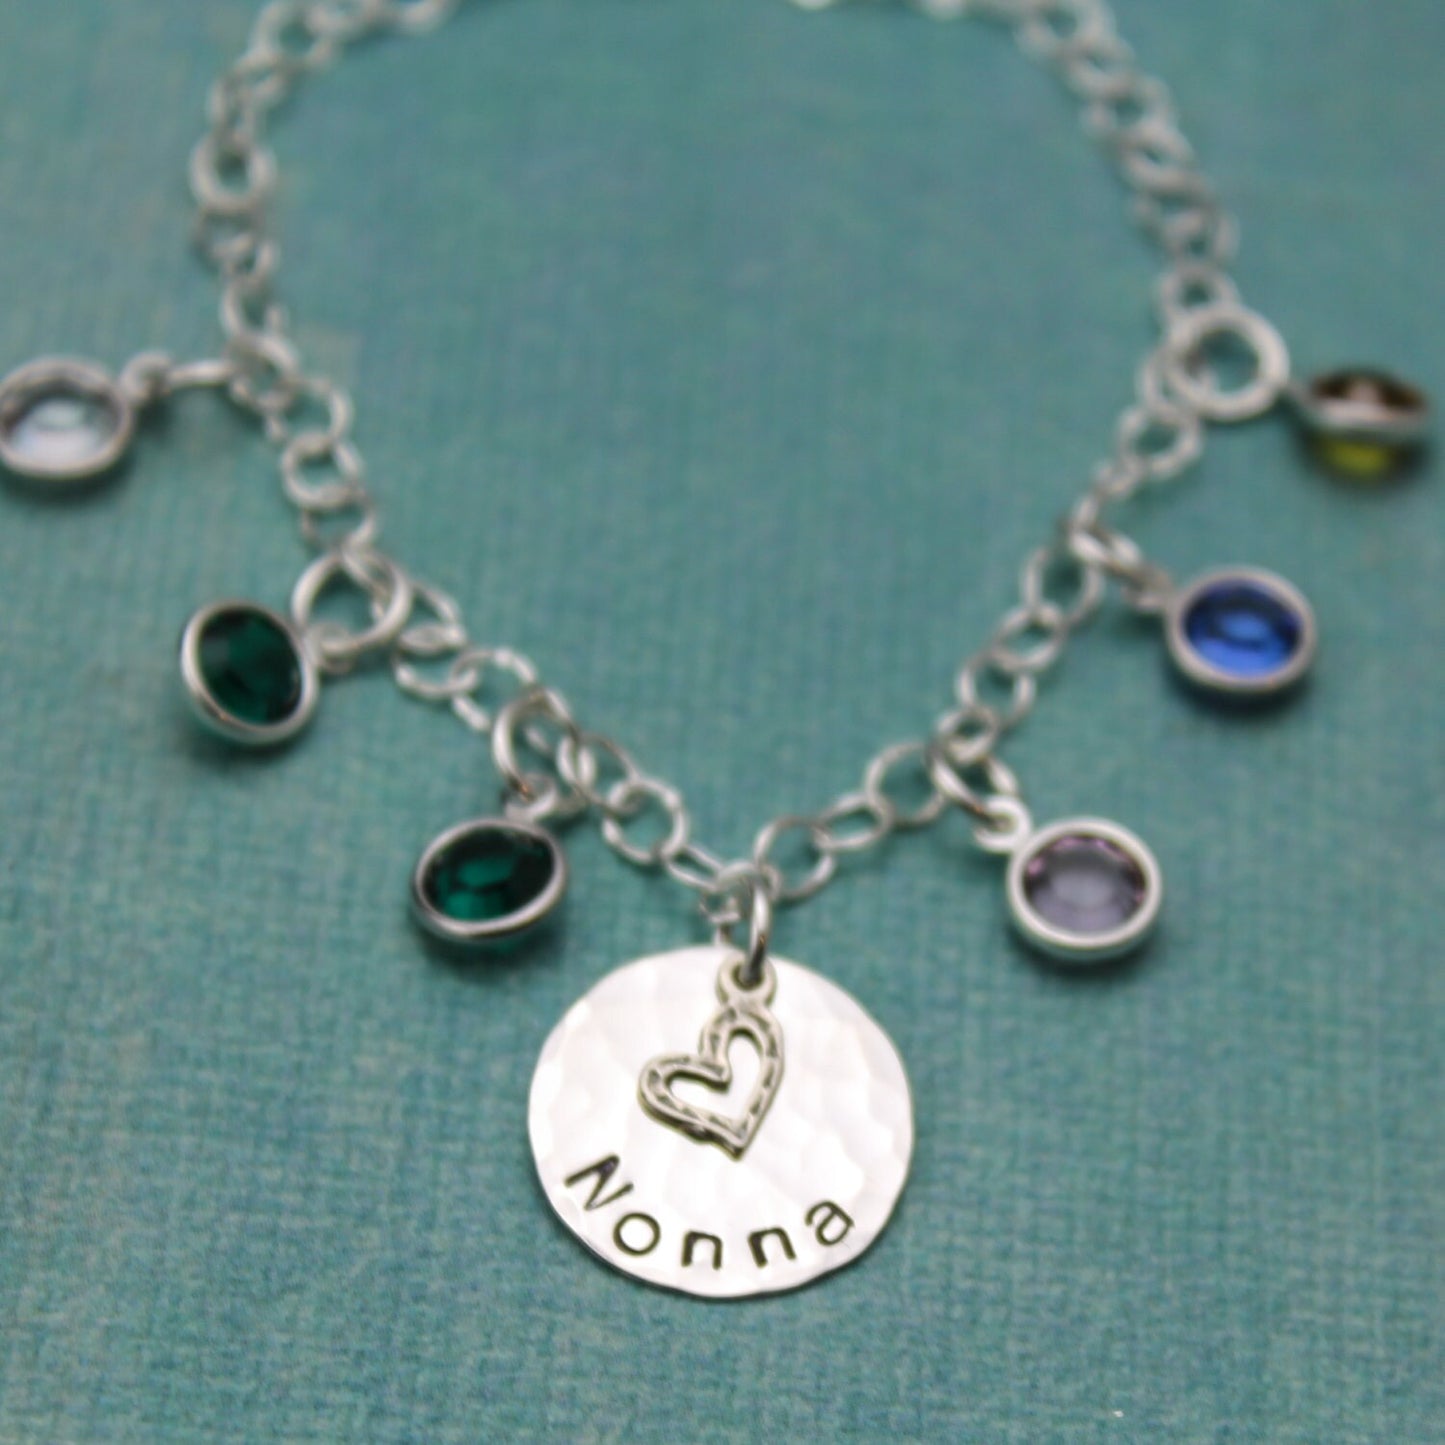 Grandmother or Mother Personalized Bracelet with Birthstones - Hand Stamped in Sterling Silver